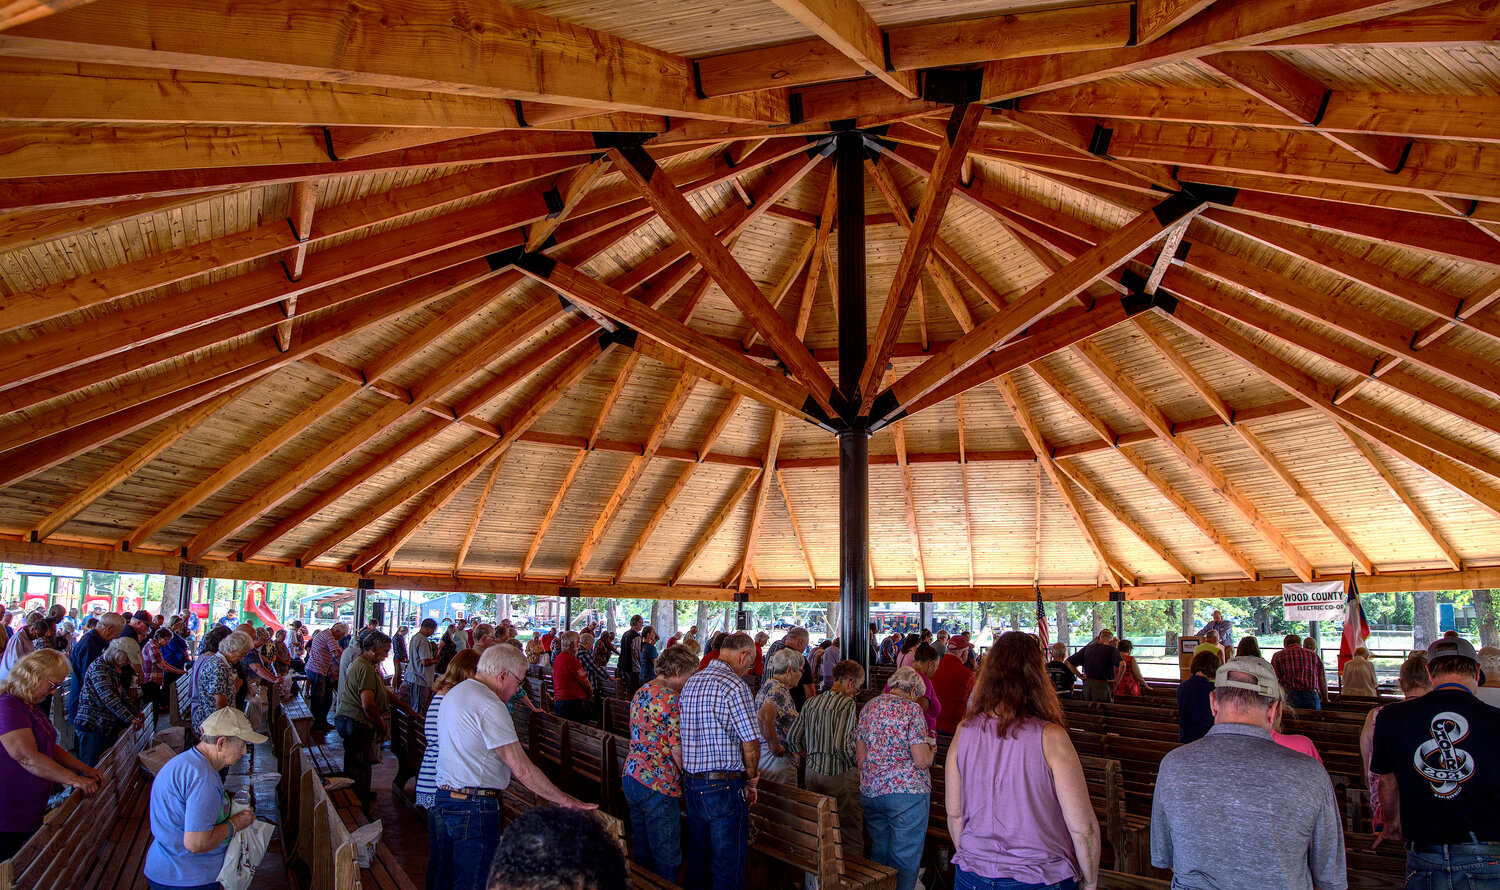 Attendees at the annual Wood County Electric Co-op meeting Friday pause for a prayer. It was the first community gathering held in the newly-reconstructed pavilion at Jim Hogg City Park in Quitman.